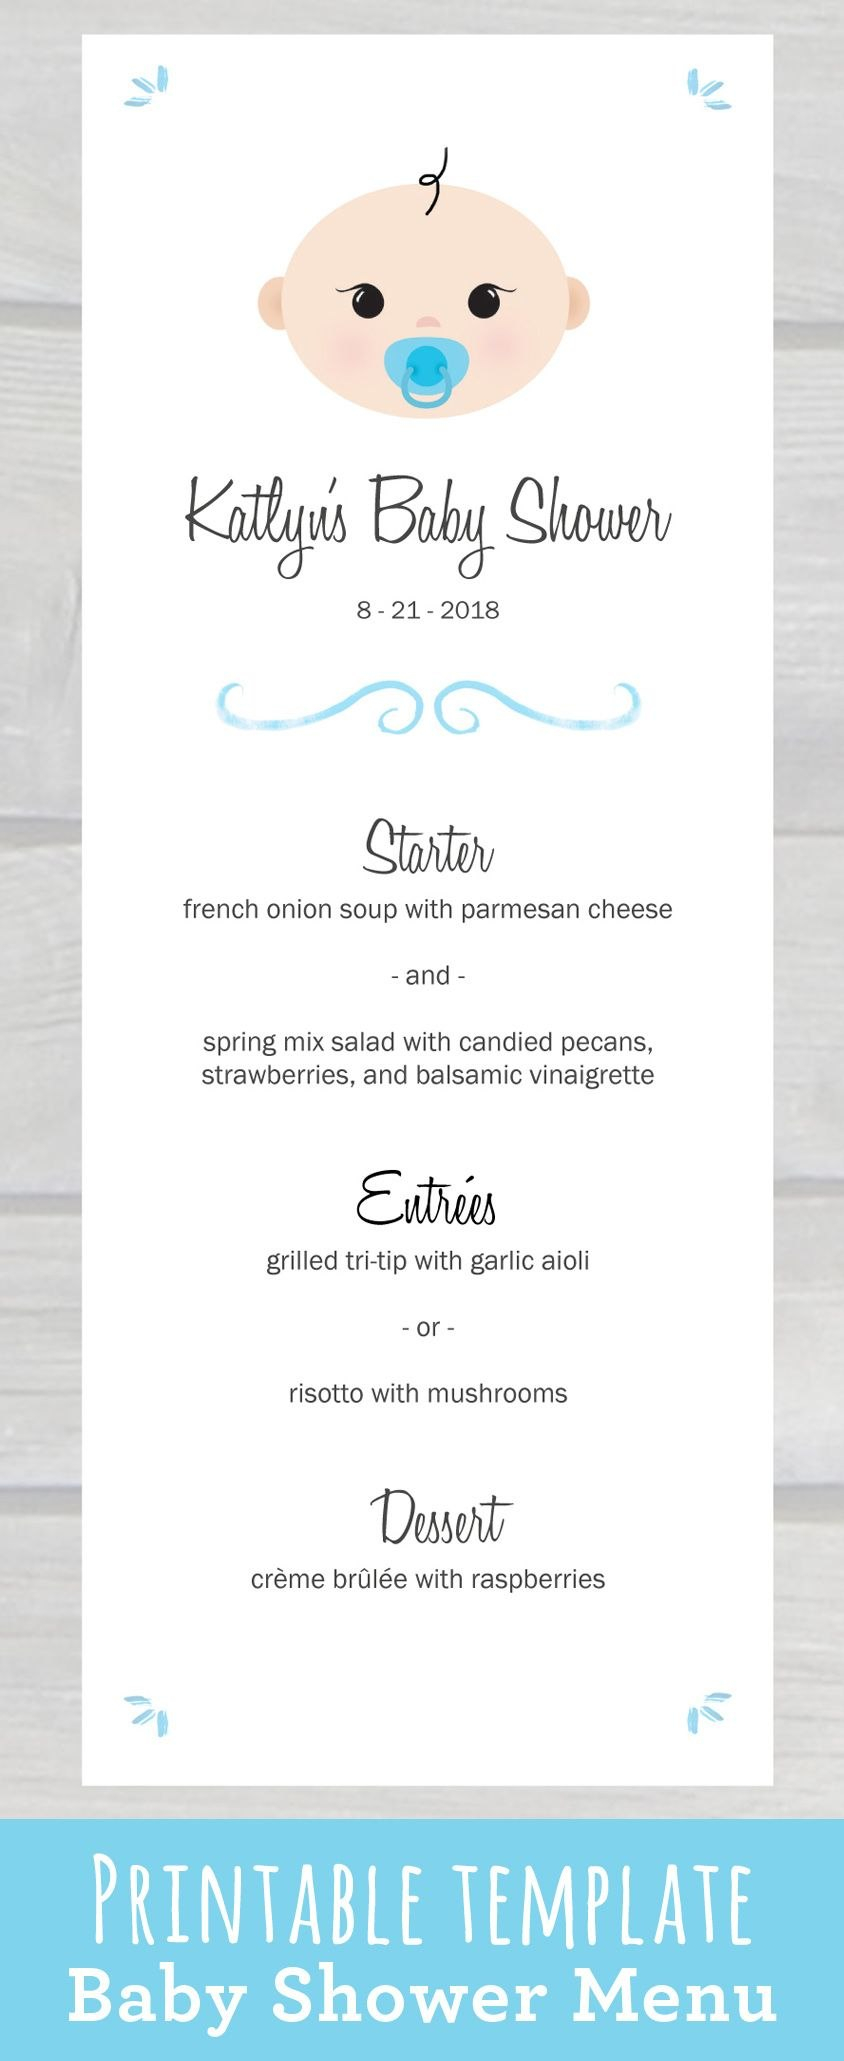 Use This Cute Baby Shower Menu Template Pdf To Edit  Print Your Own throughout Baby Shower Menu Template